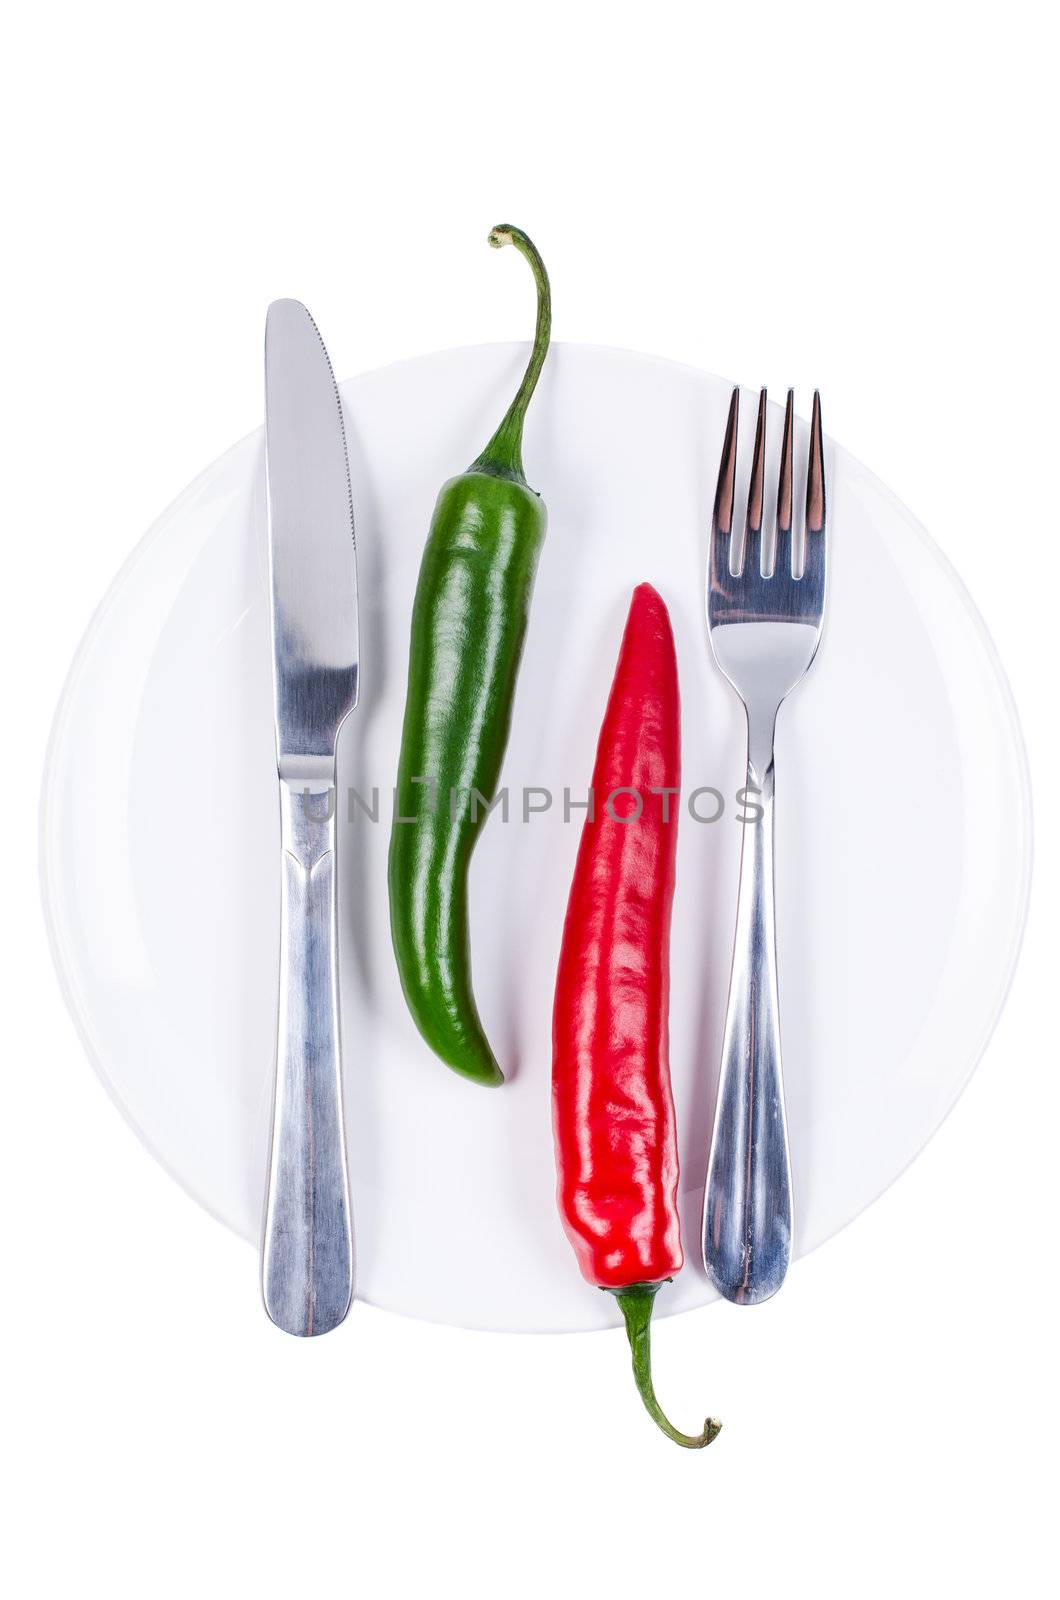 Red and green chili peppers on plate isolated